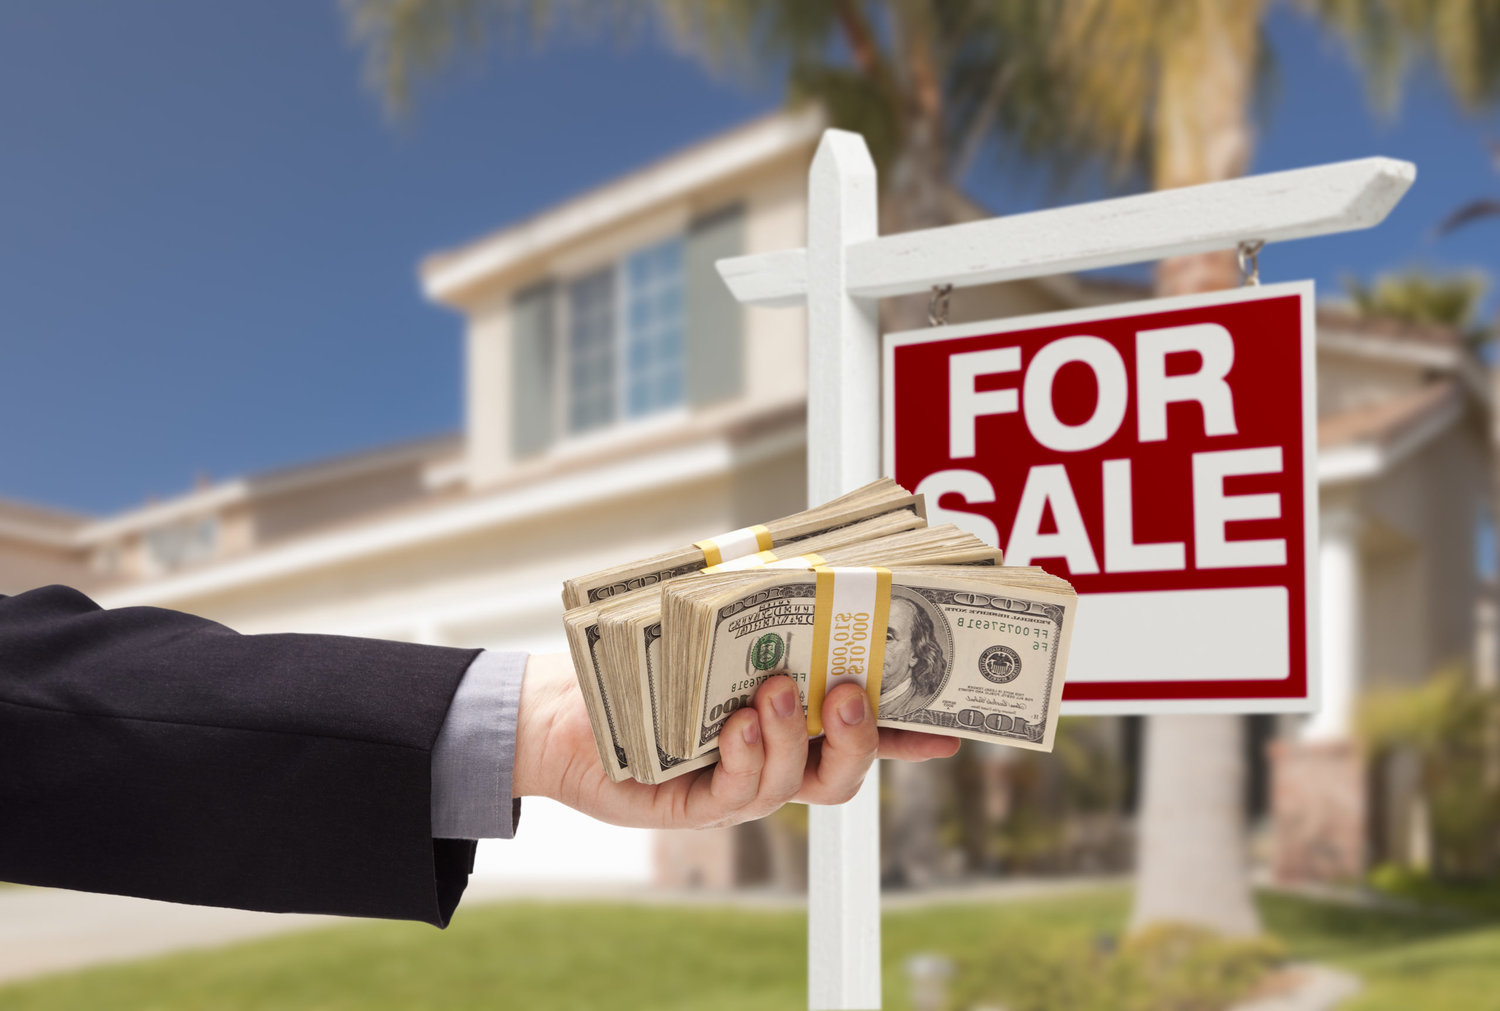 6 Things To Closely Inspect Before Purchasing A Property